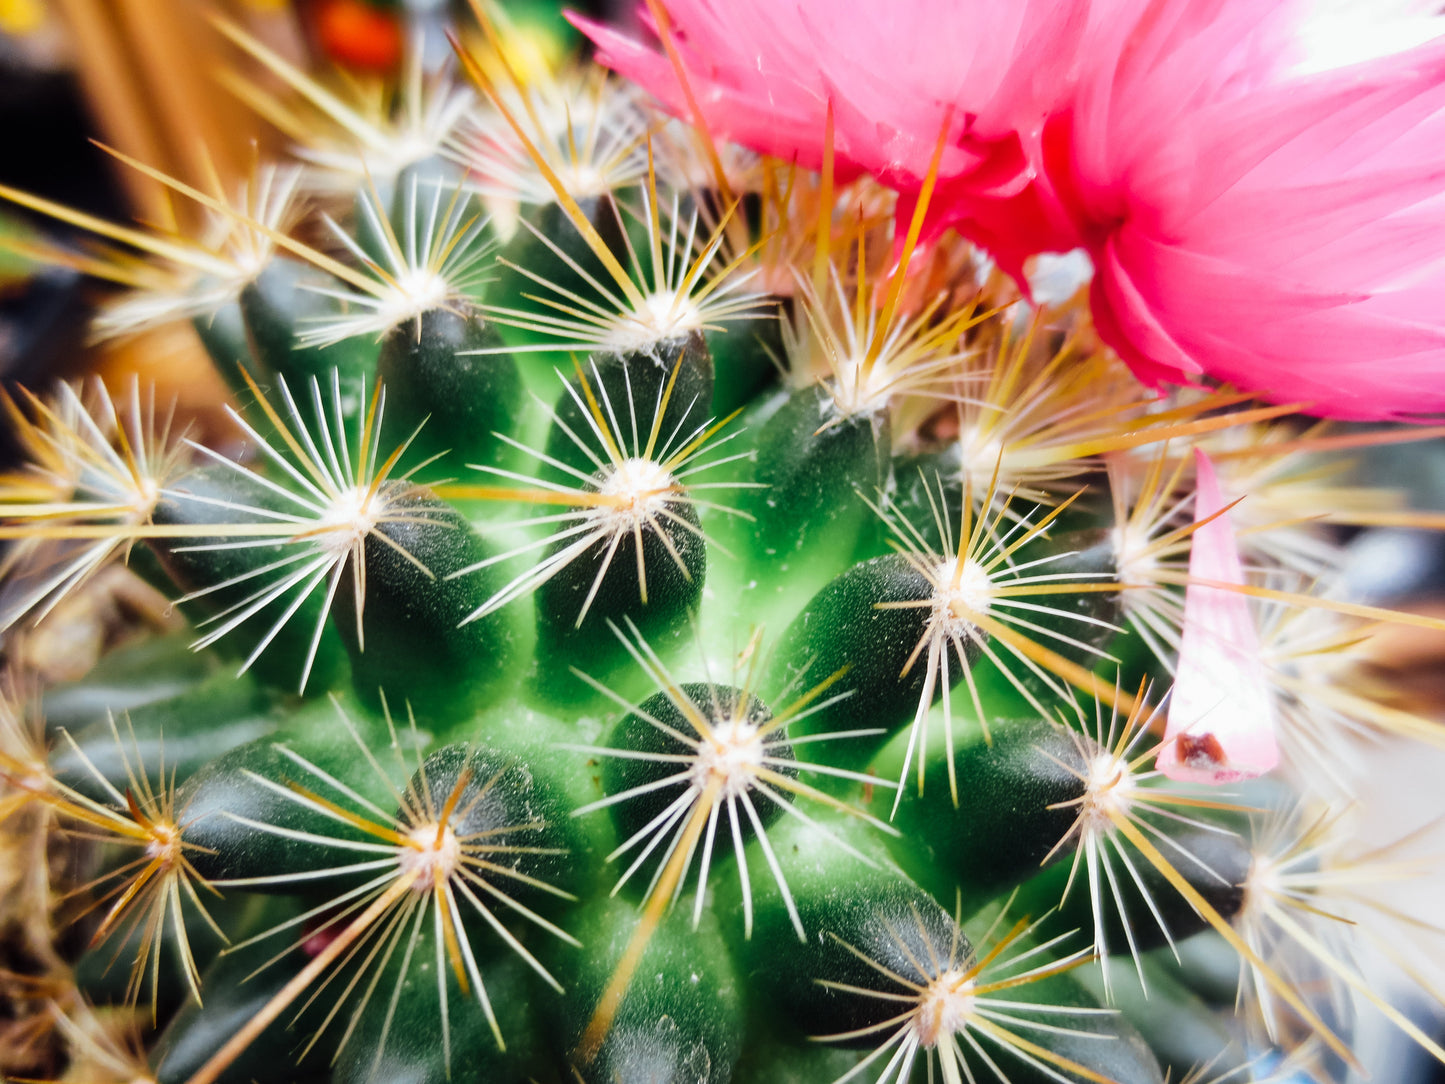 A Cactus with Thorns Photography by Melissa Shapiro